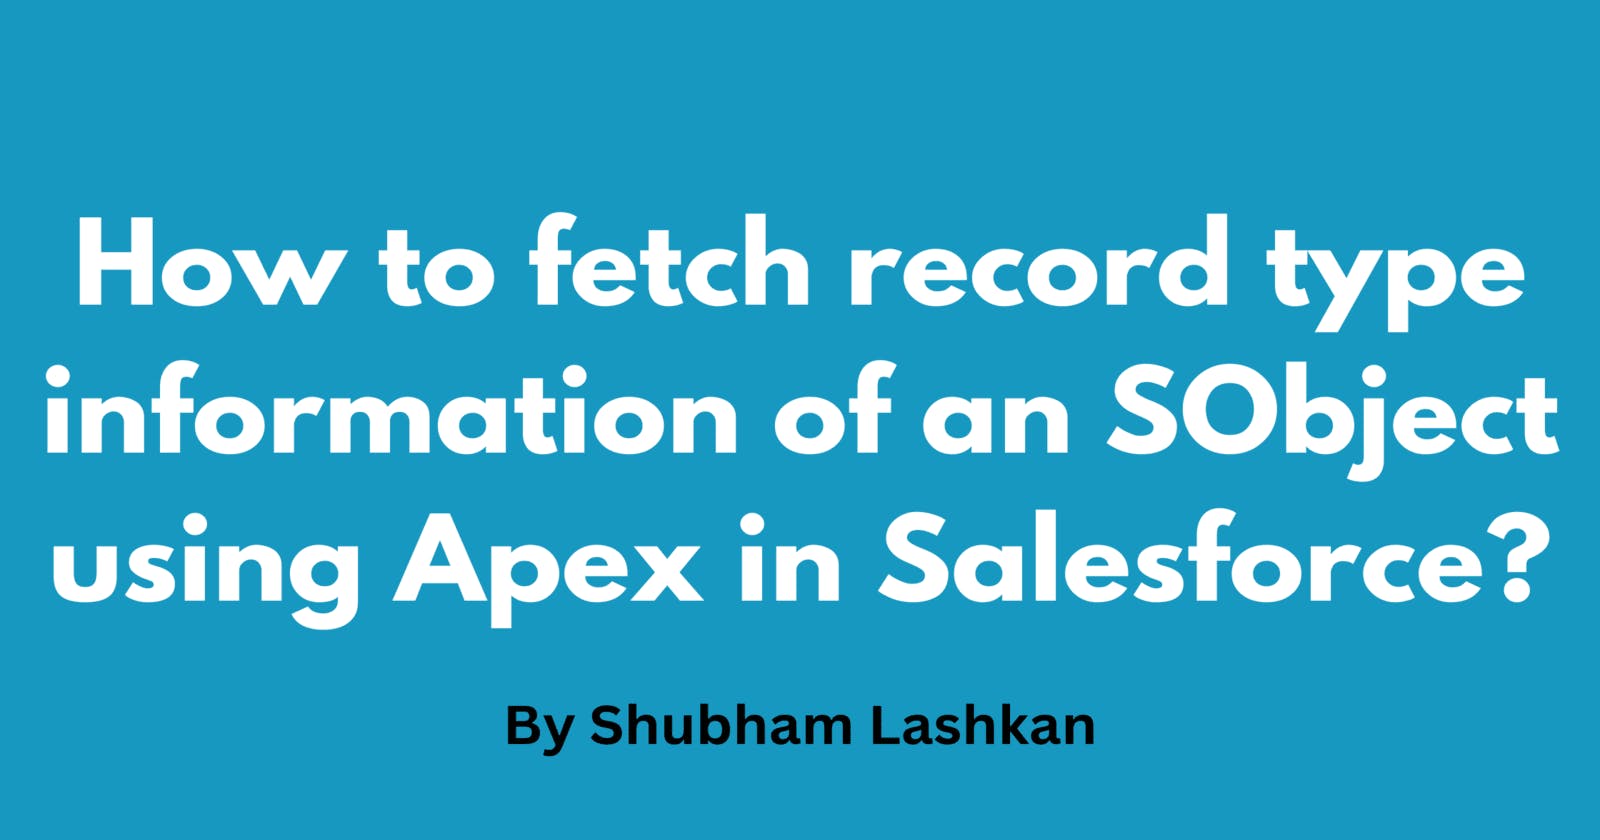 How to fetch record type information of an SObject using Apex in Salesforce?